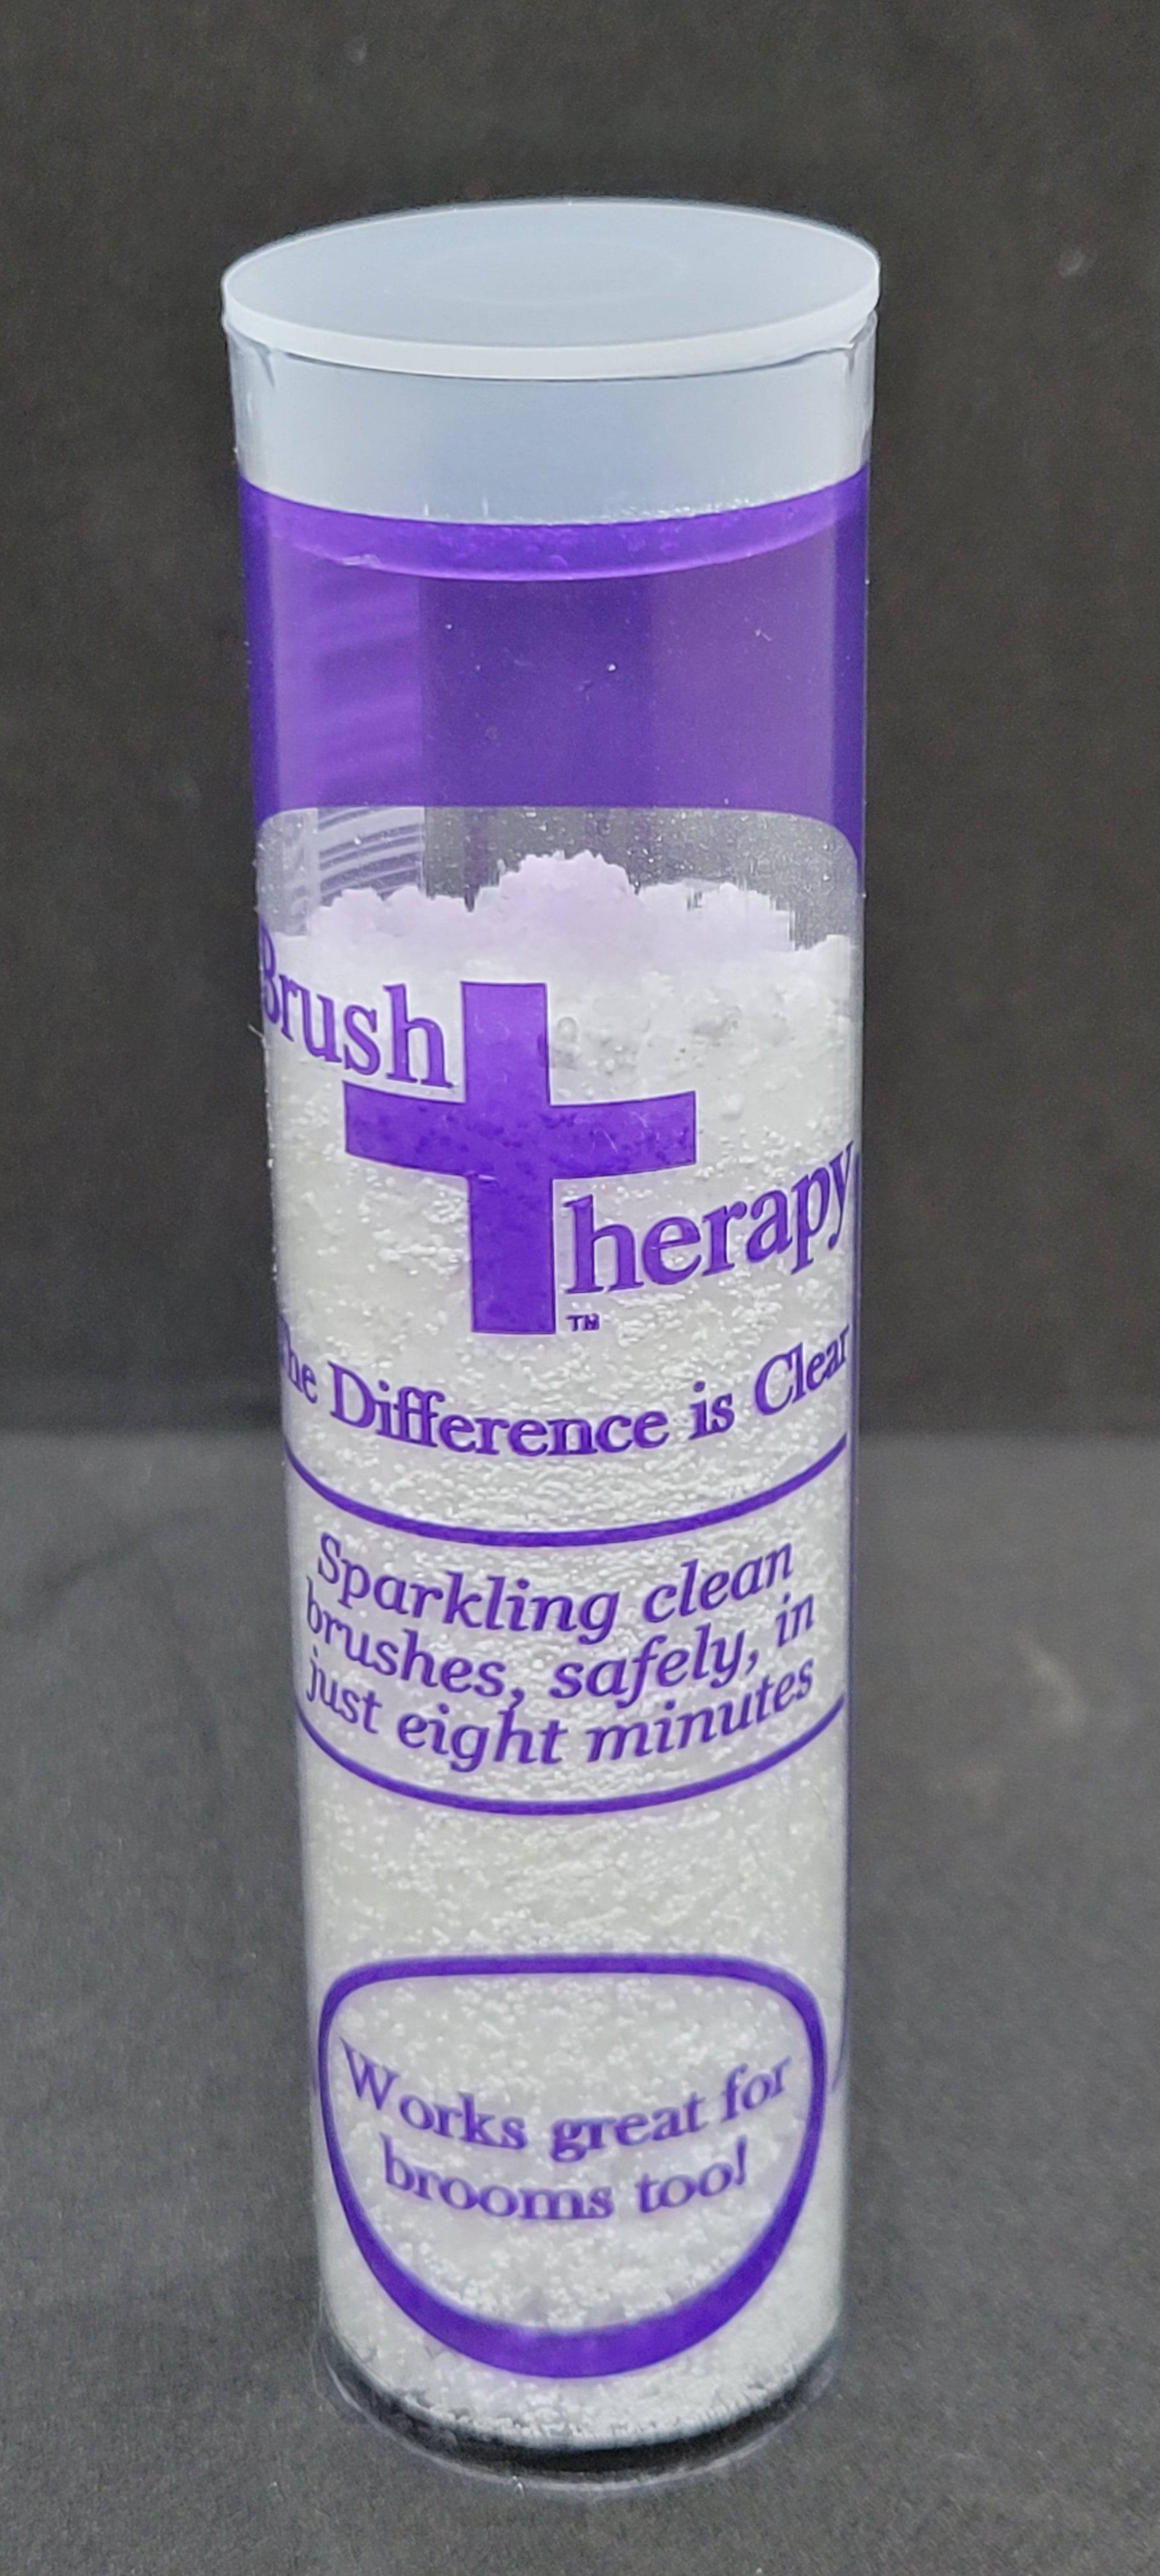 Brush Therapy - Equine Exchange Tack Shop